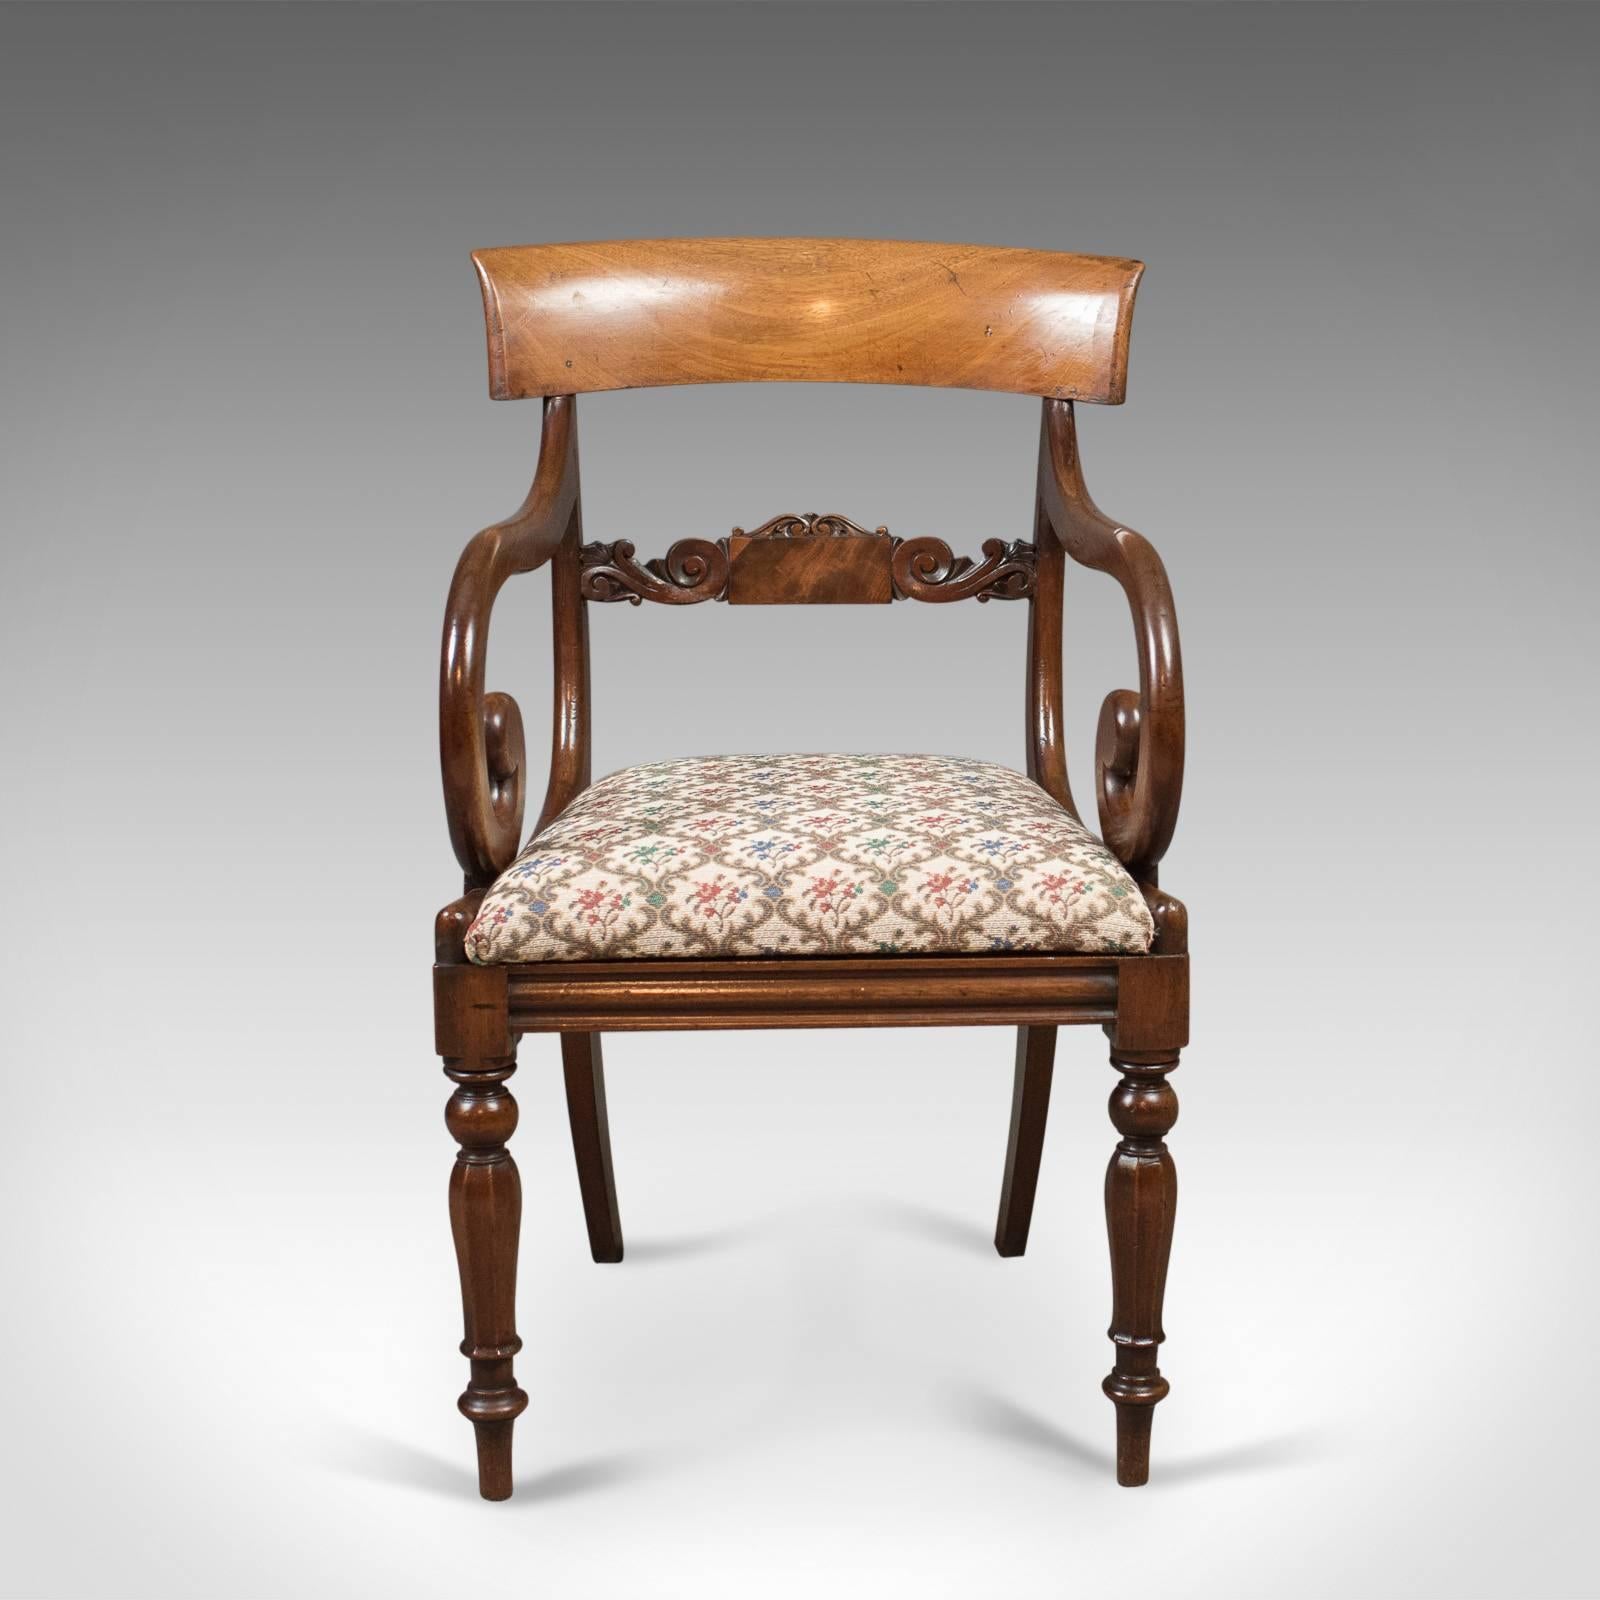 This is an antique scroll armchair in mahogany and dating to the Regency period c.1830.

Raised on delightfully turned, tapering, octagonal section legs
Pinched and swept tapering rear legs
Fluted front seat rail with side rails sweeping up into